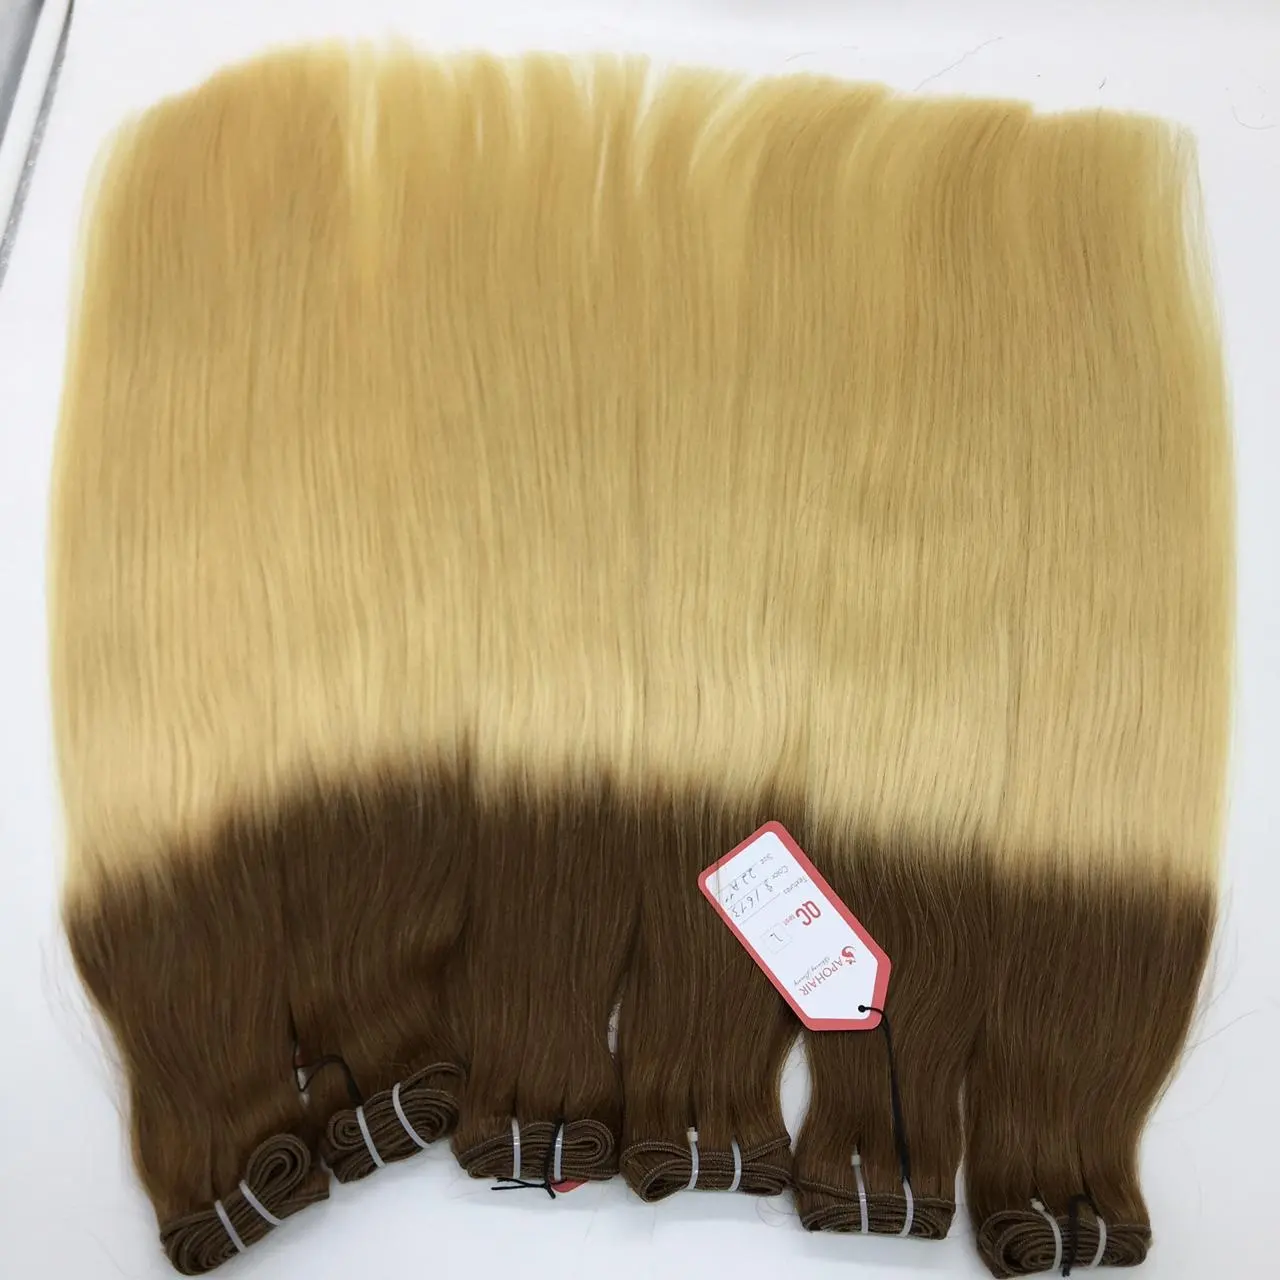 Ombre color hair from APO hair company - Best Quality 100% Virgin Human Hair Extension